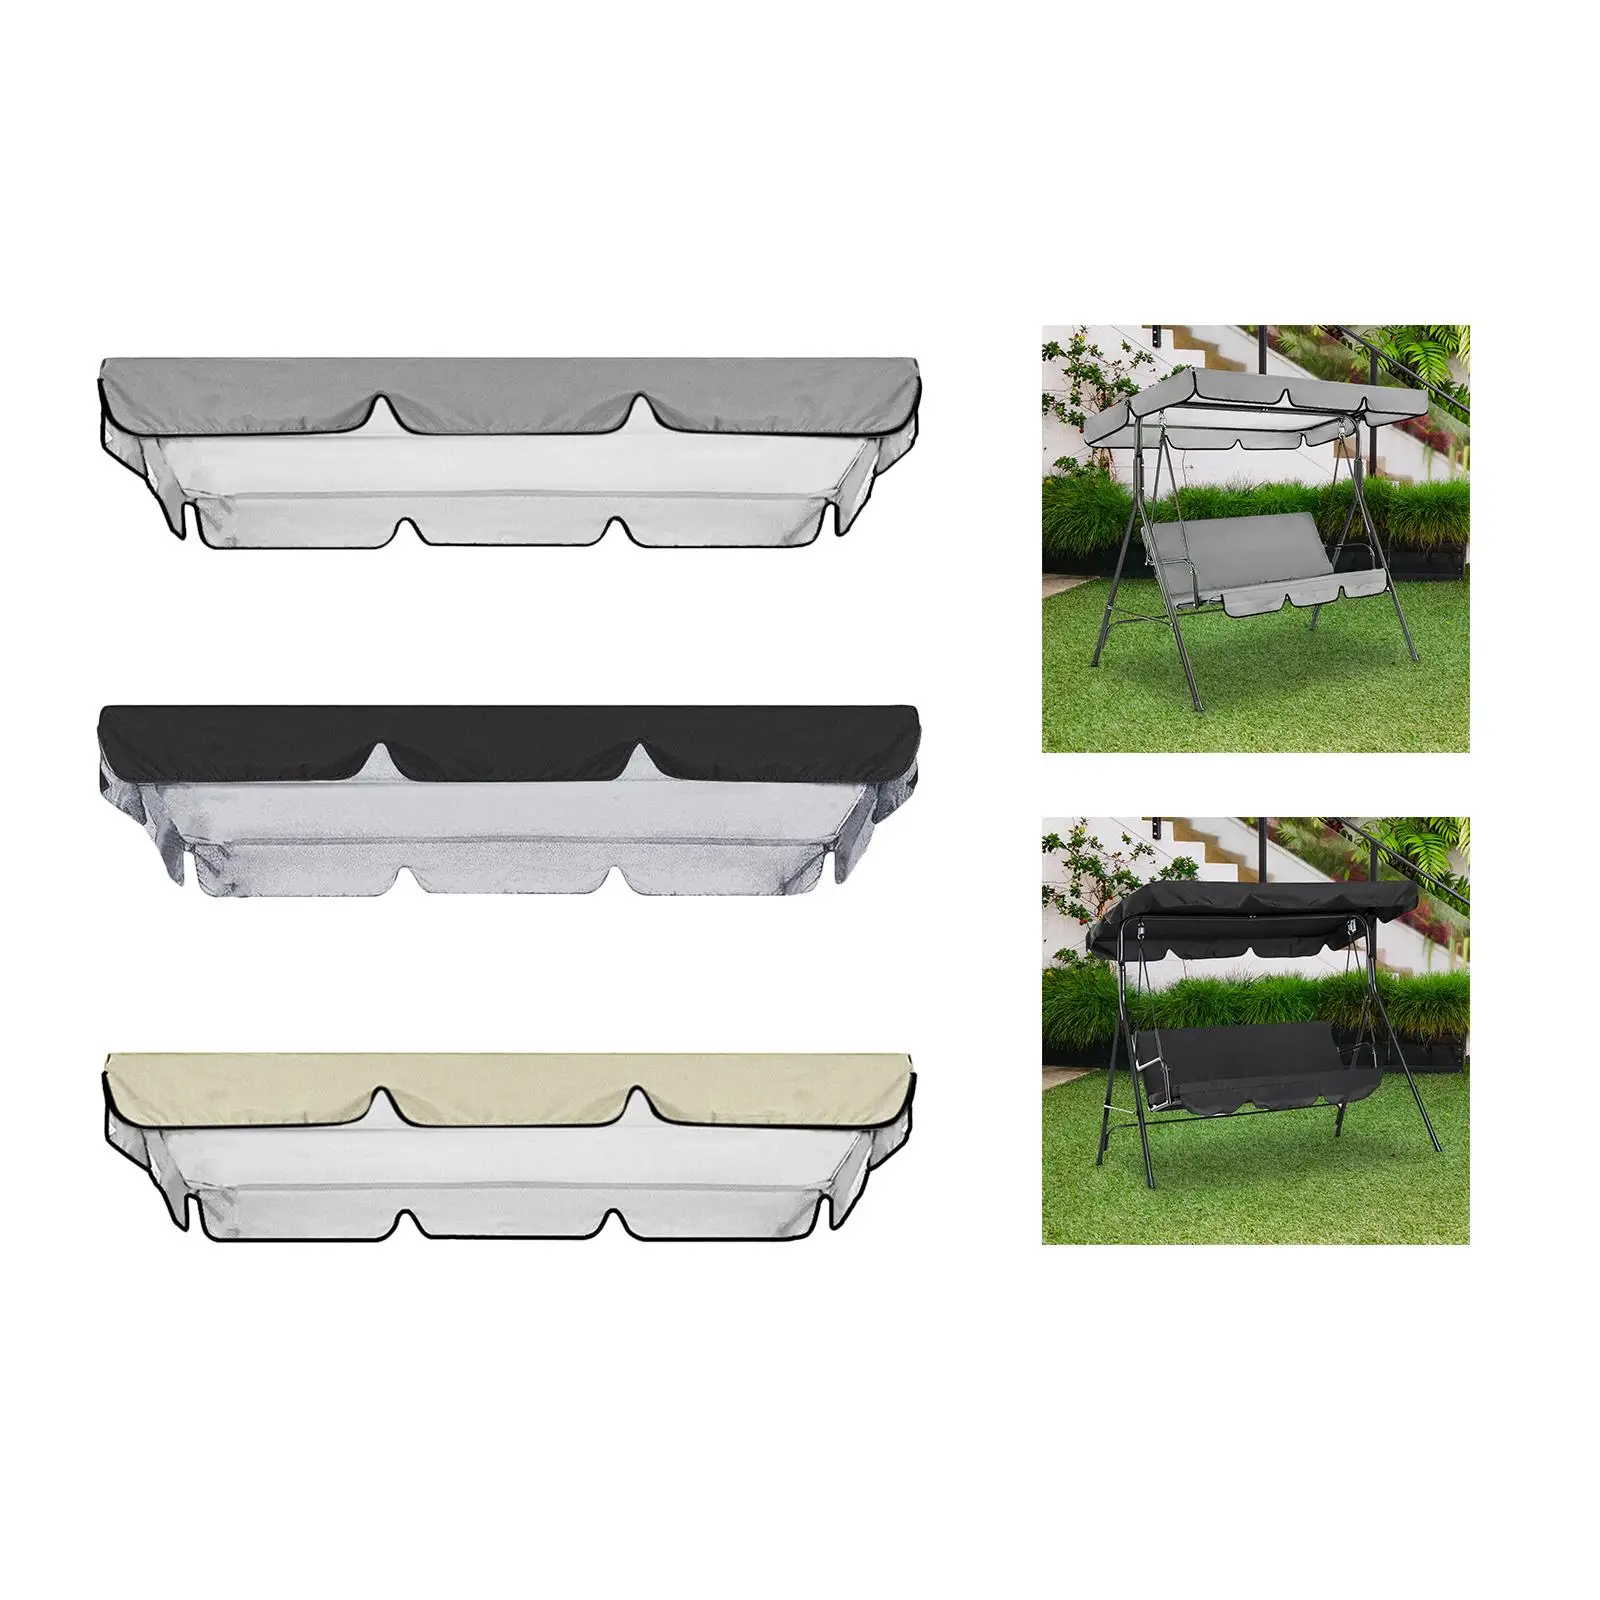 Swing Canopy Replacement Cover Swing Cover for Bench Seat Garden Swing Chair